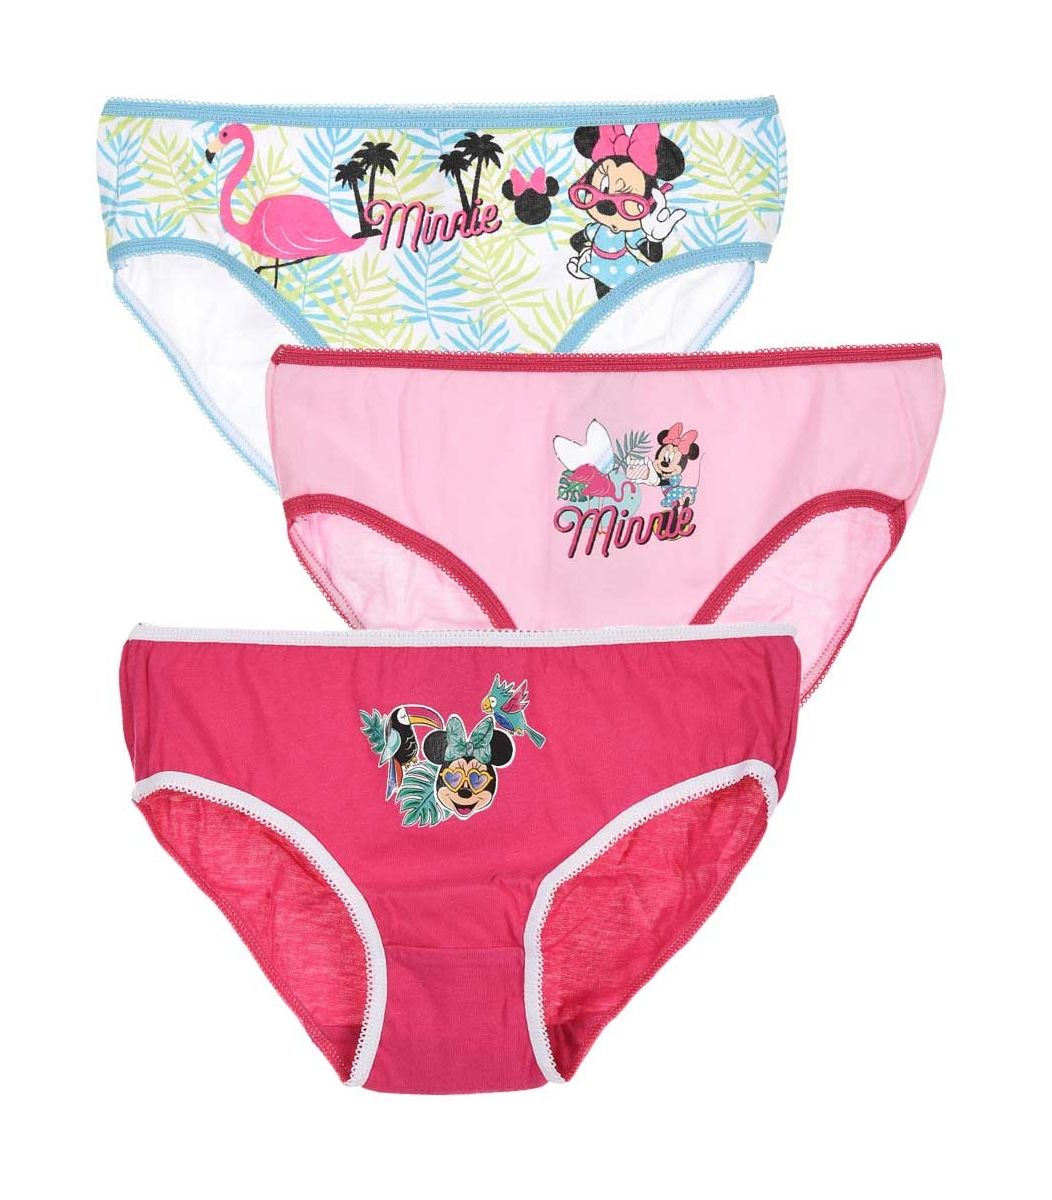 Children panty Minnie 3pcs Size 2yrs old Color Colorful